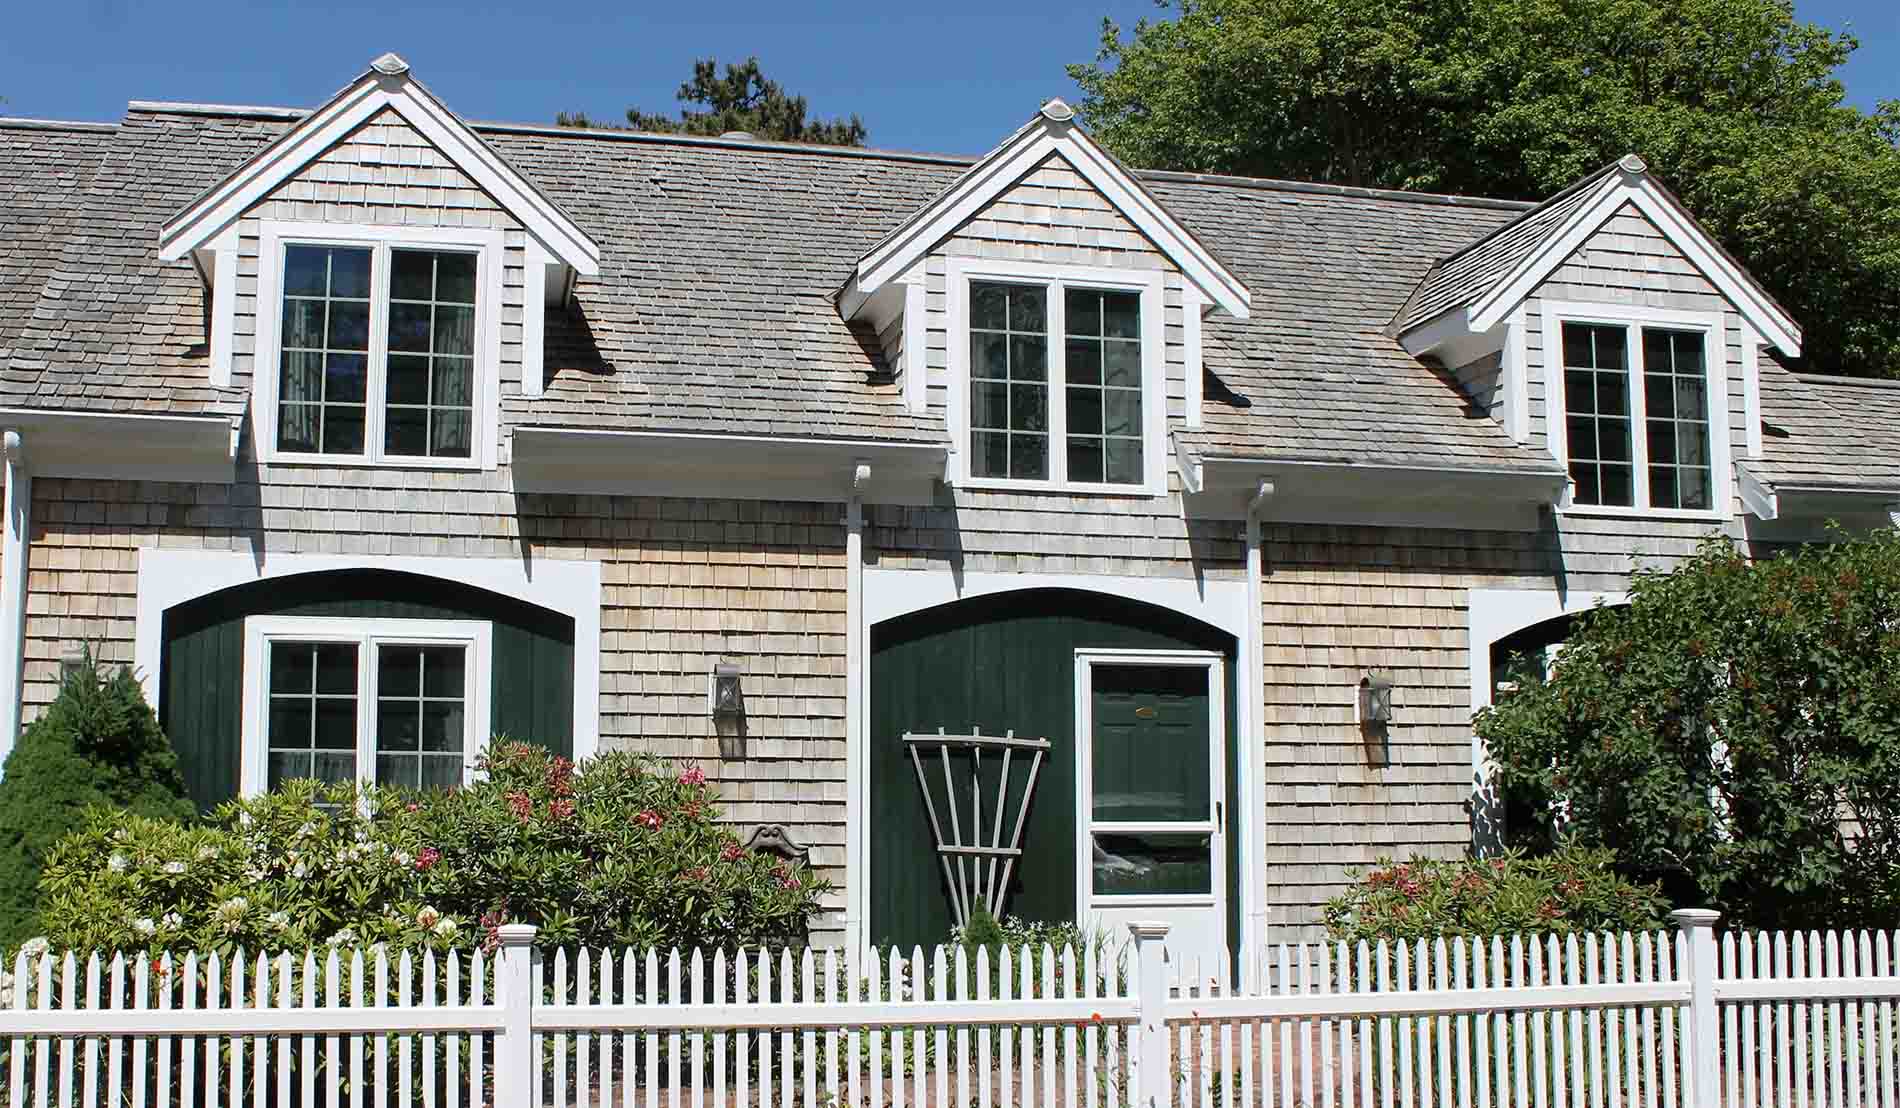 Exterior of stables building showing shingled building with dark green trim and white picket fence